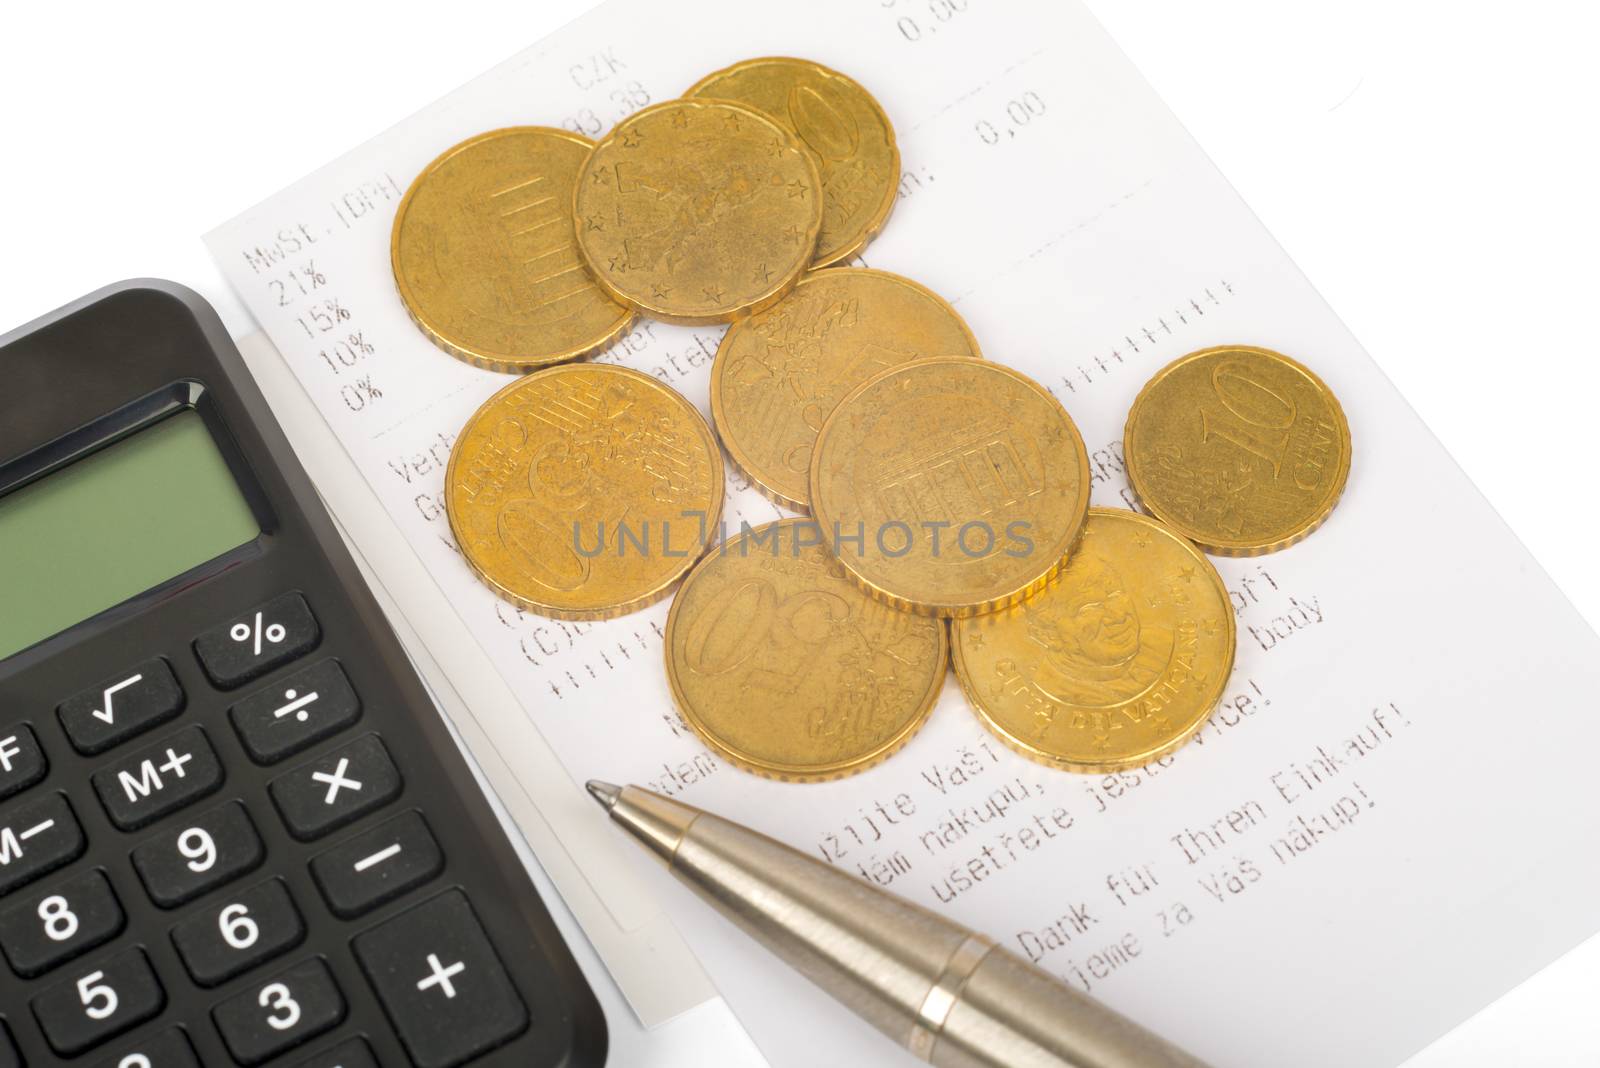 Coins, chart and calculator as symbol for exchange rates, closeup